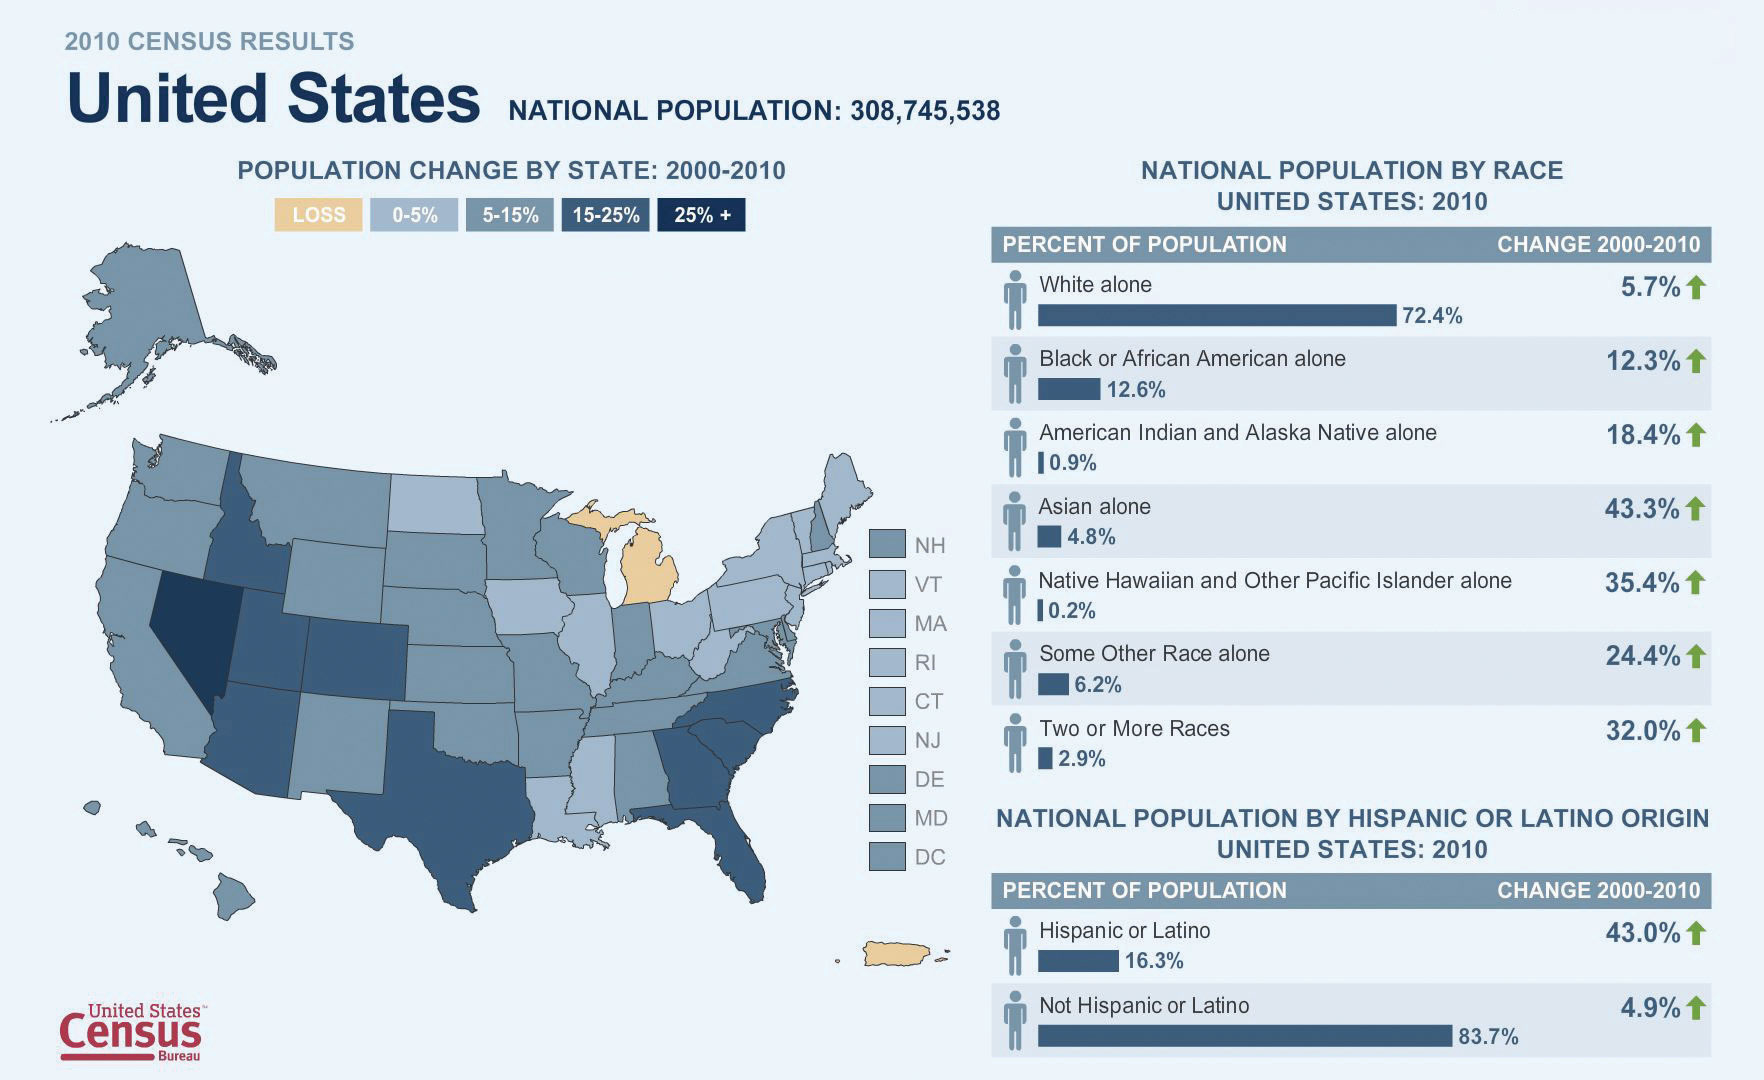 Demographic Data for the United States by Race